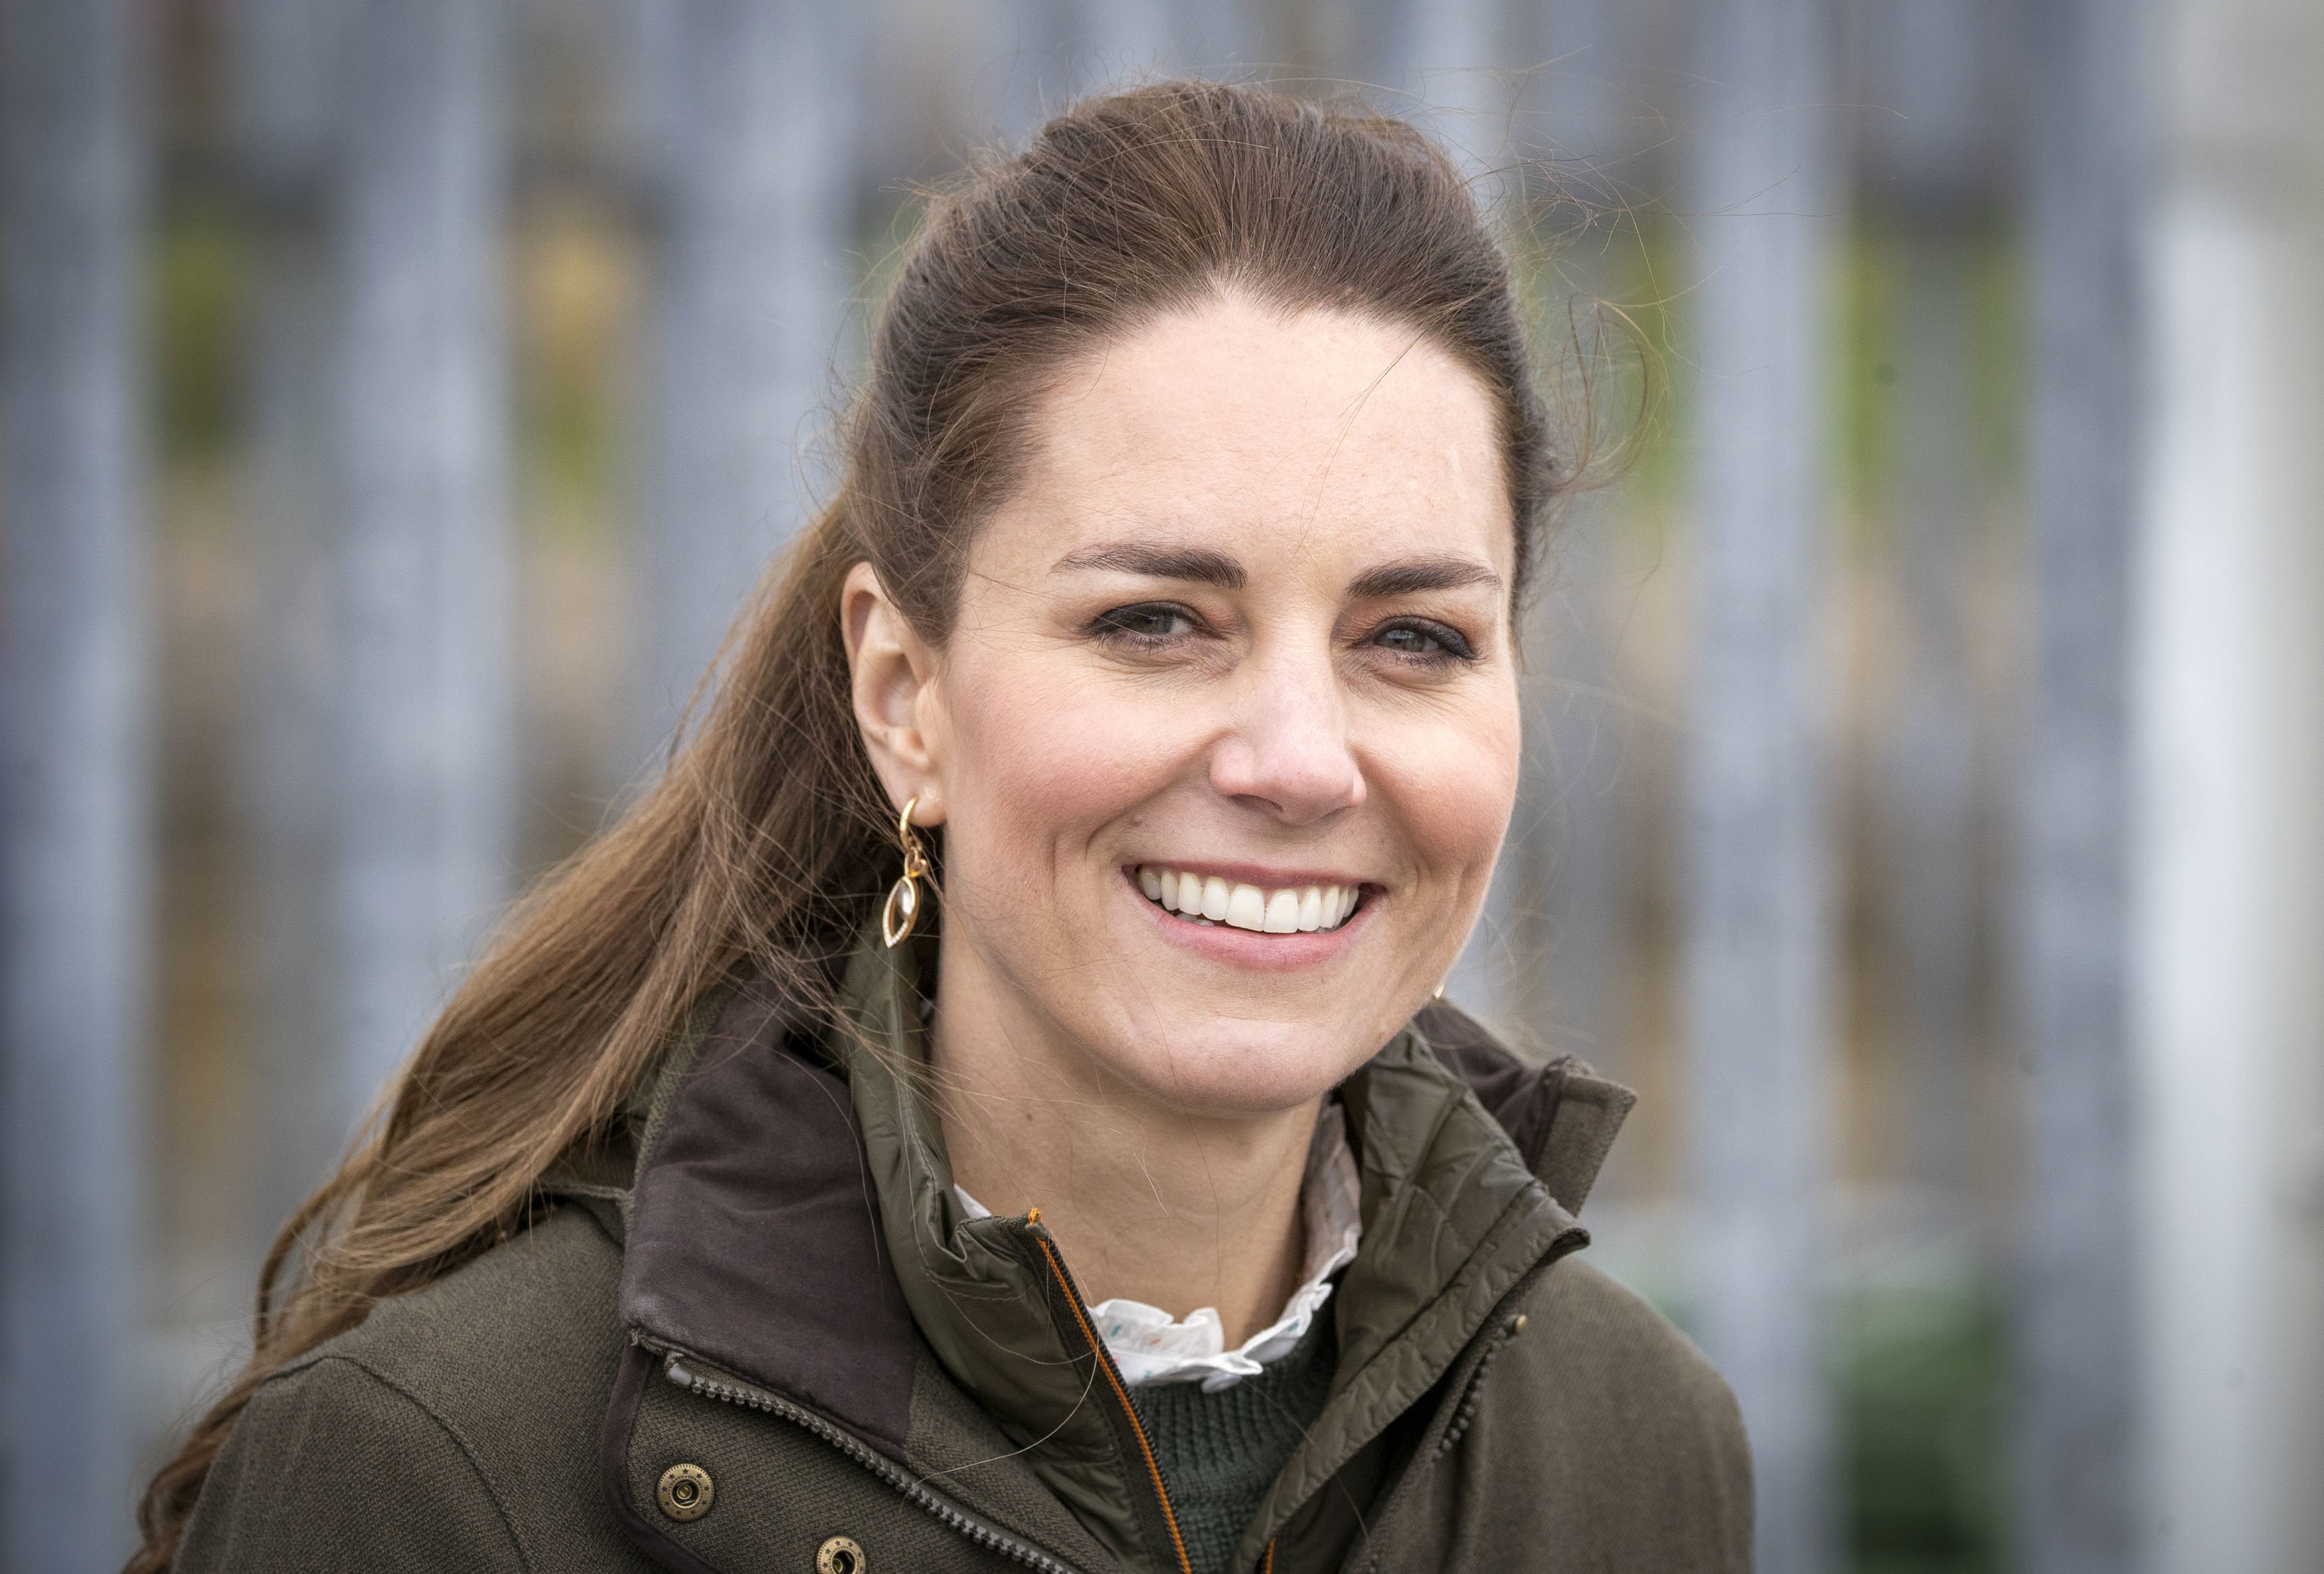 Duchess of Cambridge, Kate Middleton, during a visit to the European Marine Energy Centre on May 25, 2021. | Photo: Getty Images